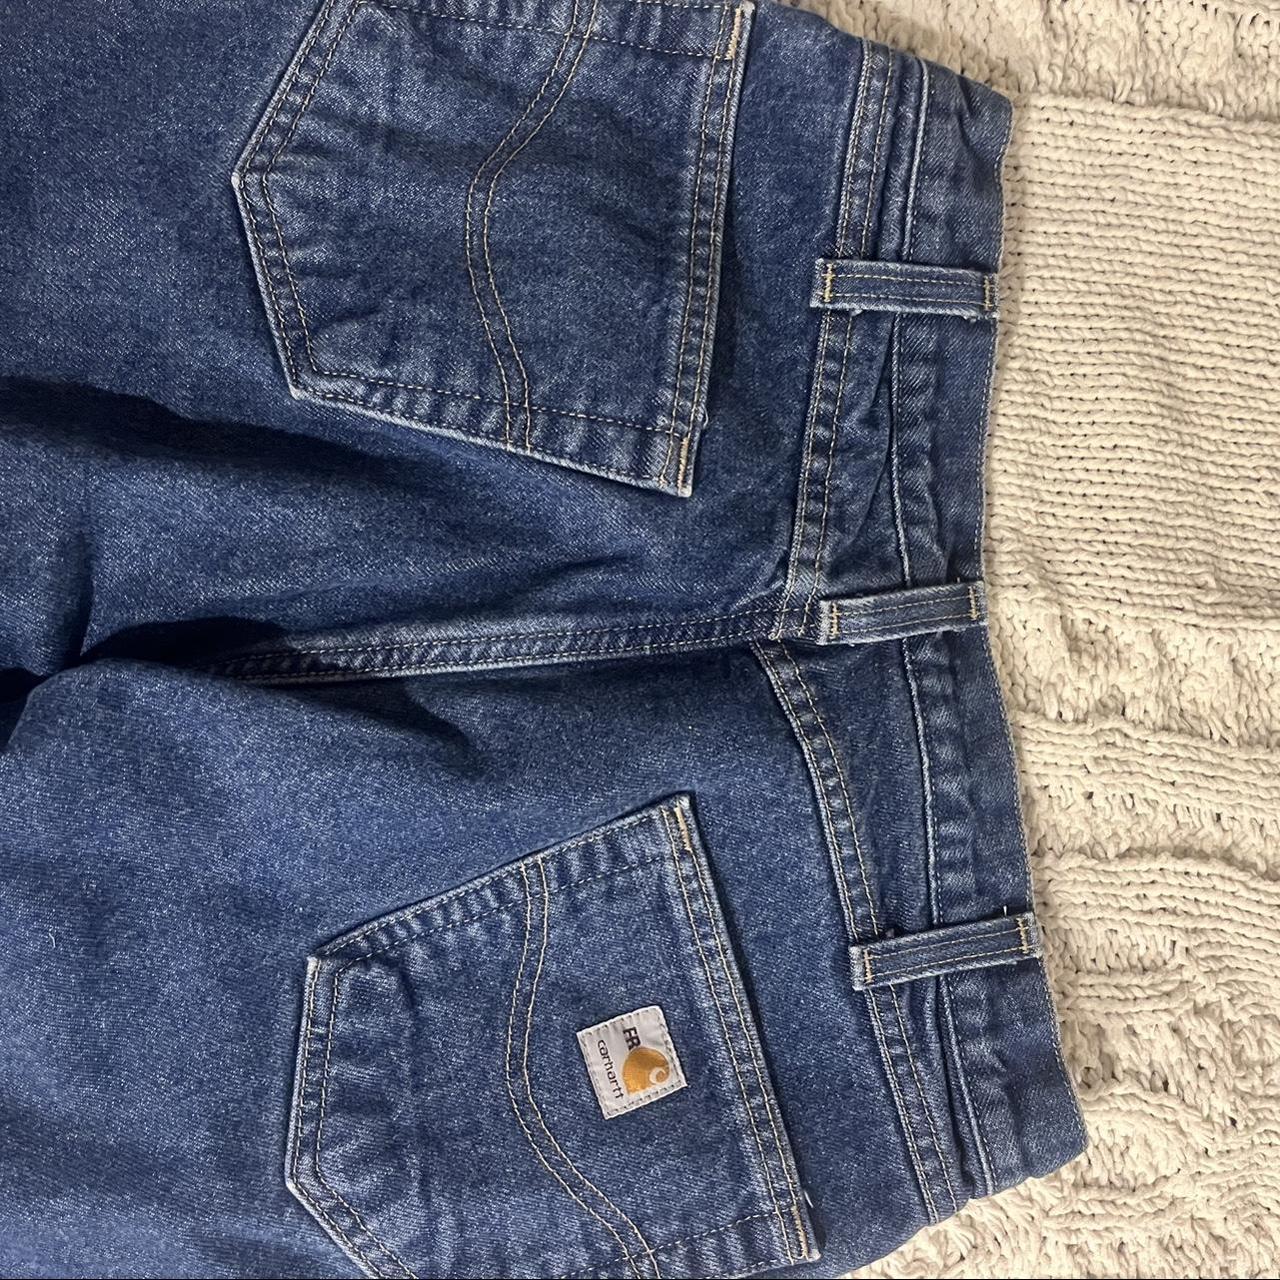 Carhart baggy jeans Thermal lined Medium wash 32x30 - Depop